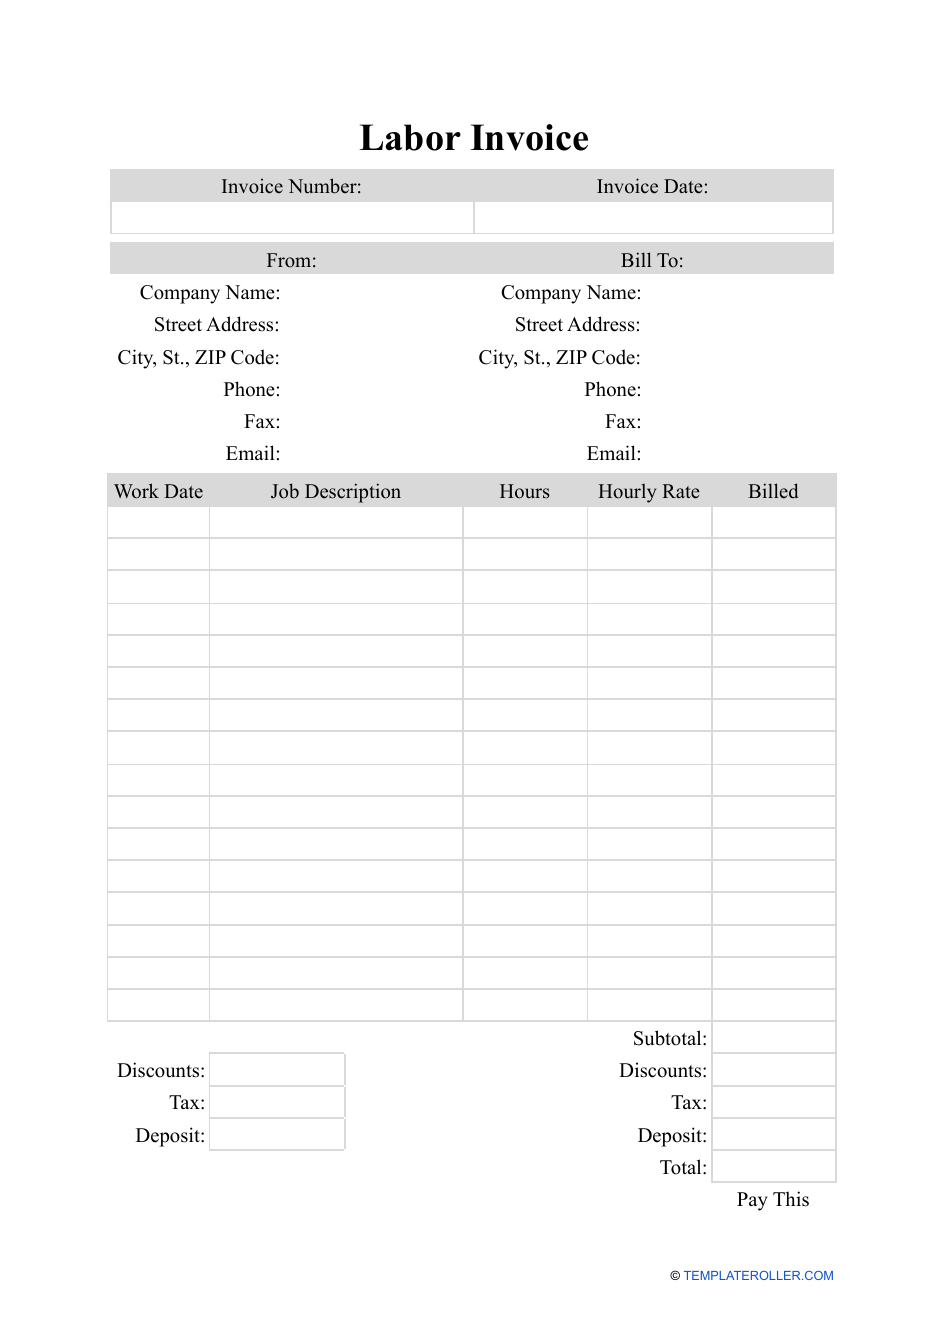 Labor Invoice Template Download Printable Pdf Templateroller